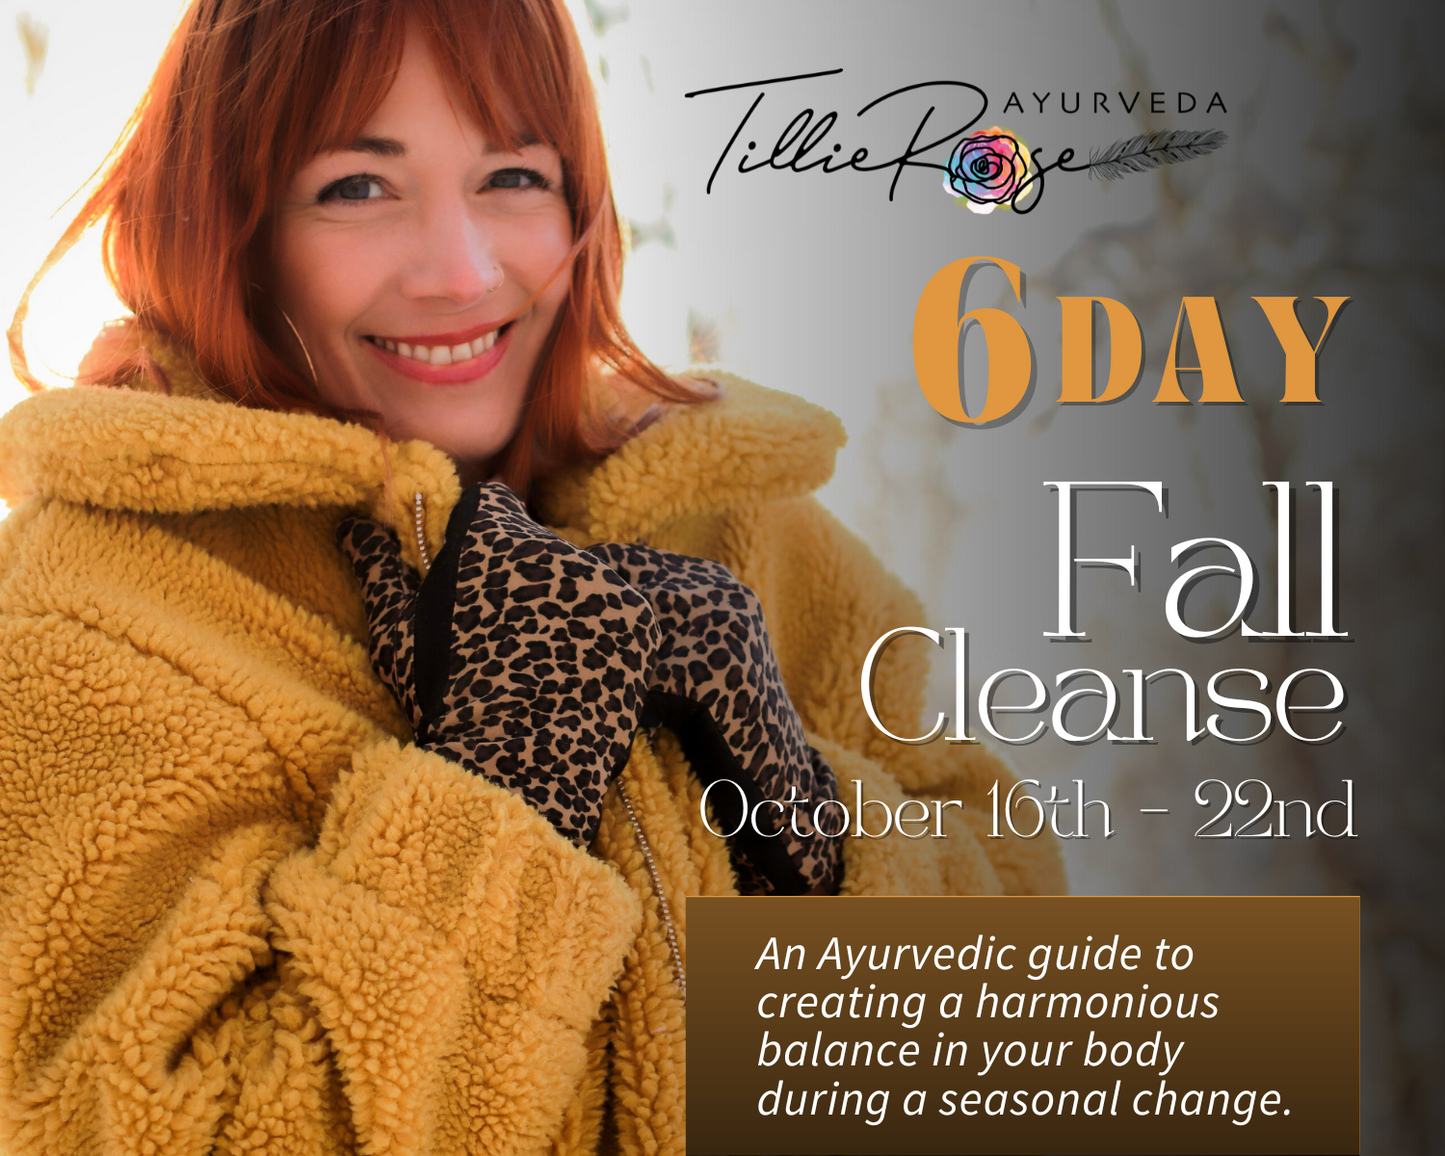 LIVE & INTERACTIVE 6 Day Fall Ayurvedic Cleanse | October 16th - 22nd